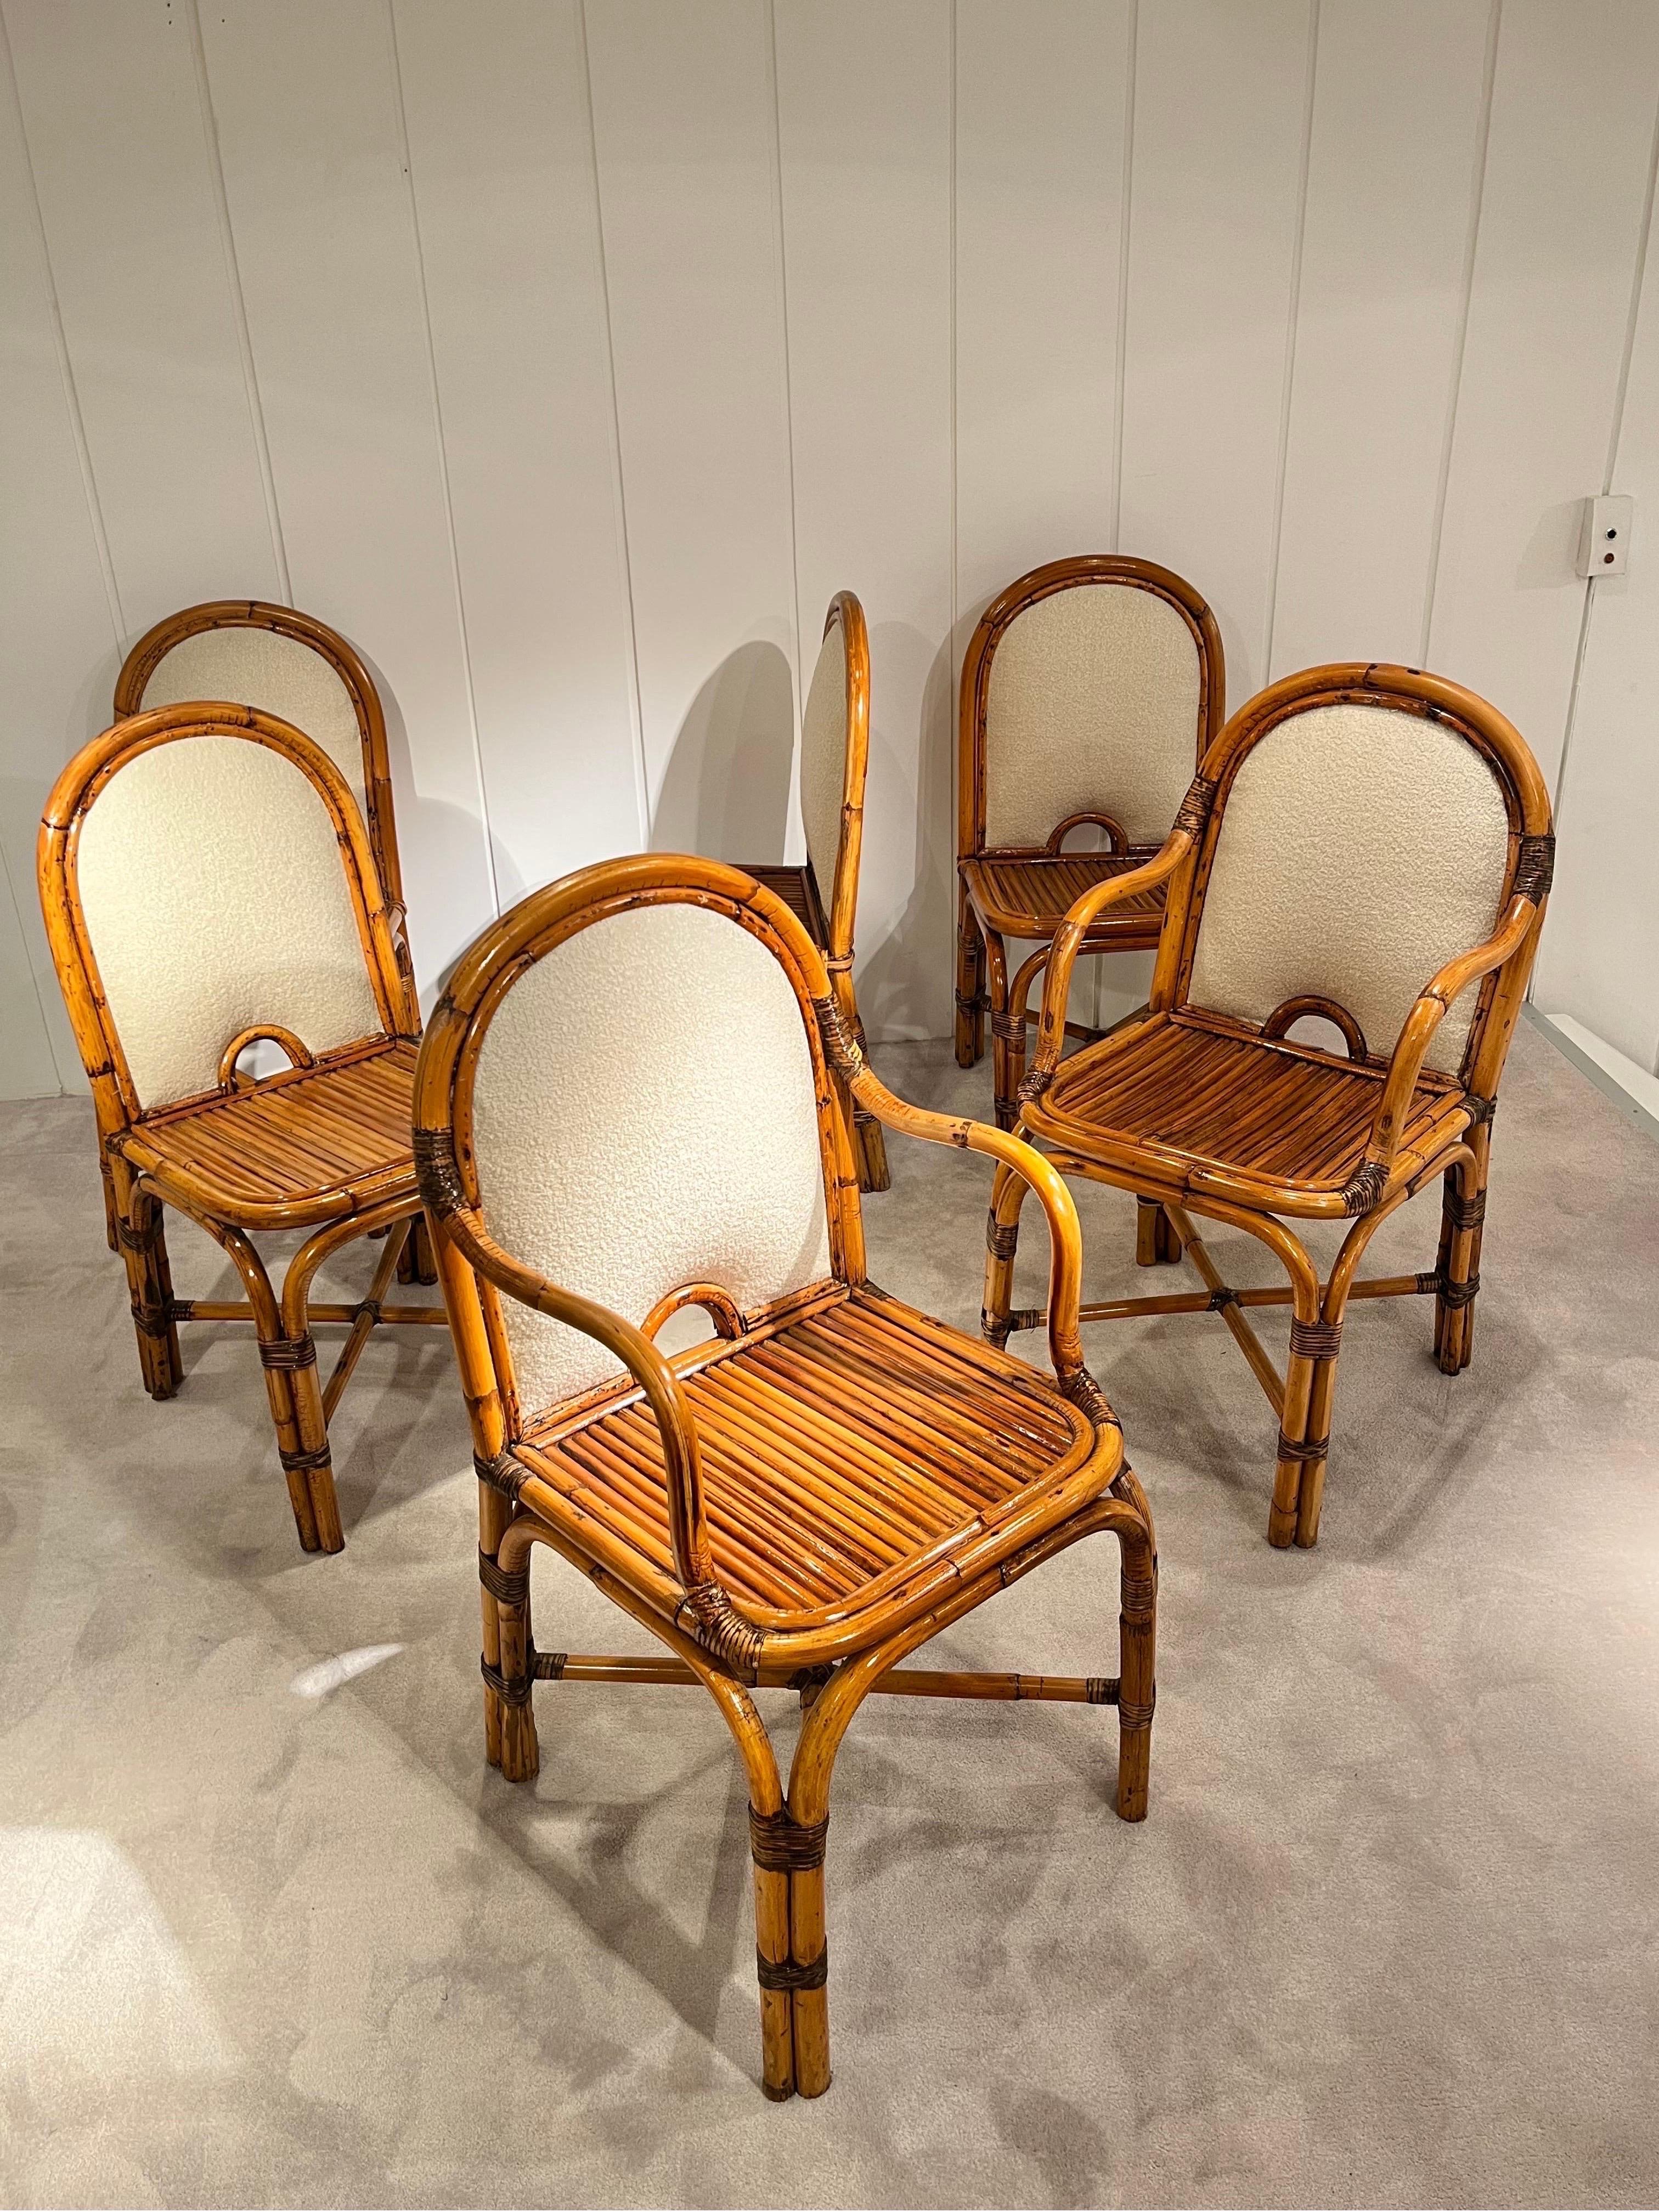 Set of 6 chairs in rattan and fabric by Gabriella Crespi
Composed by 2 armchairs and 4 chairs
Rising Sun collection 
All chairs have the signature stamped on brass 
Italy 1975
the buyer can be provide with an aythenticity certificate from the